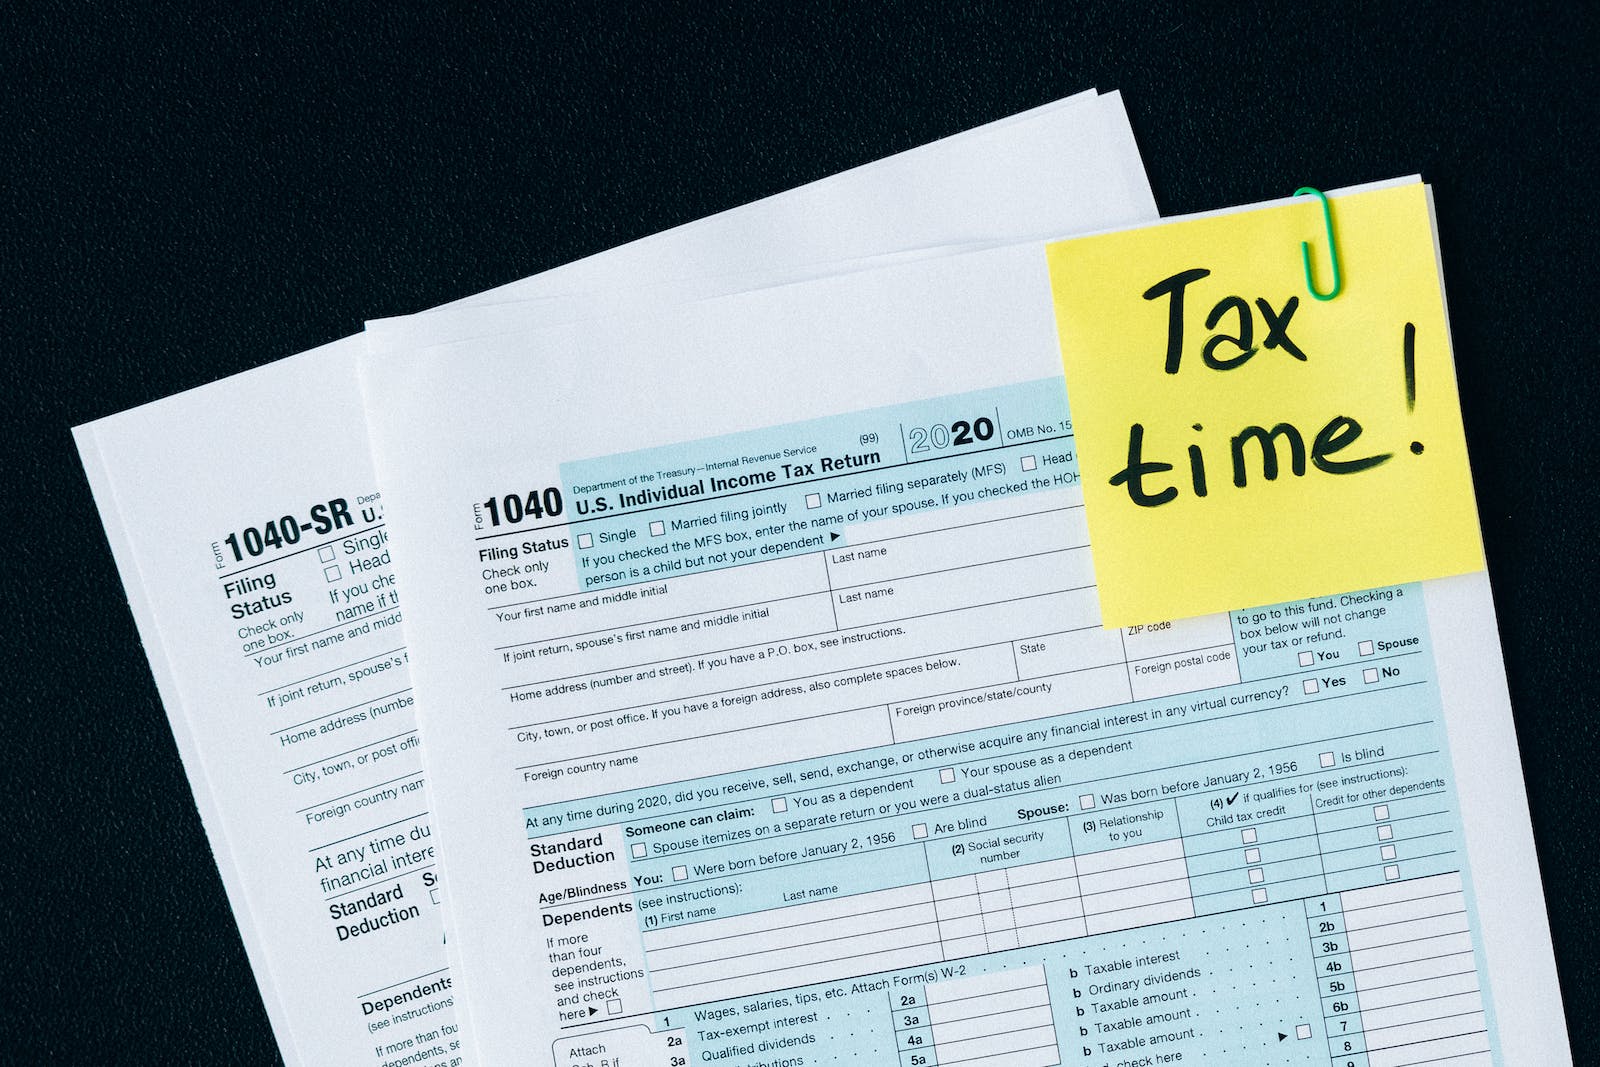 How to Avoid Common Tax Filing Mistakes